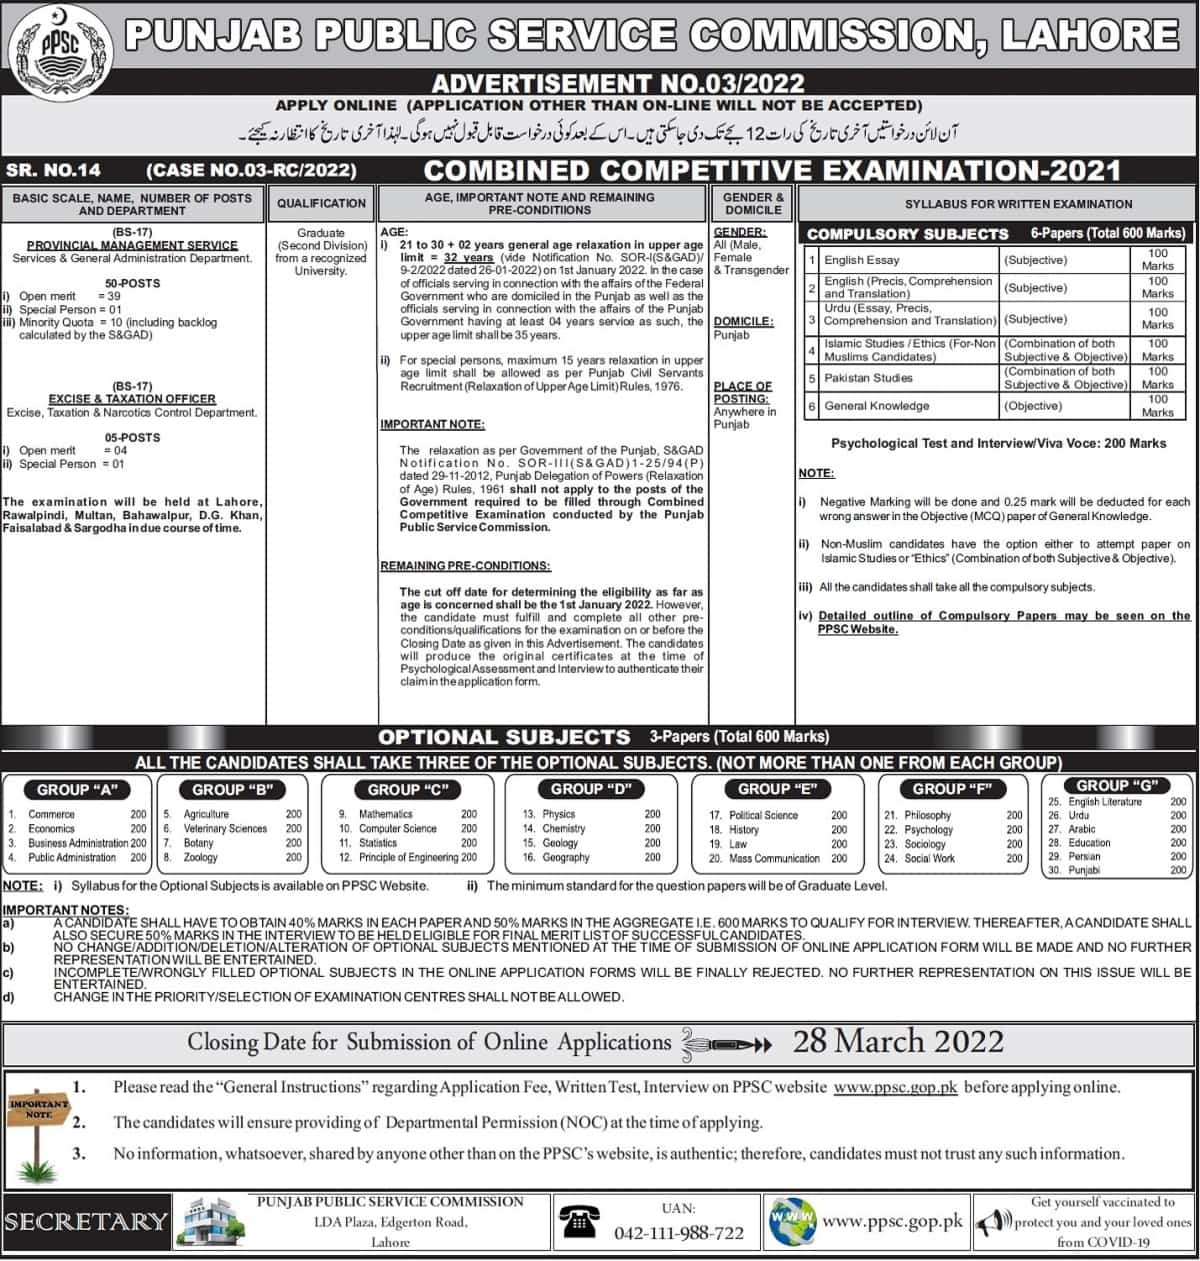 PPSC Jobs 2022 Advertisement No 3/2022 Combined Competitive Examination 2021